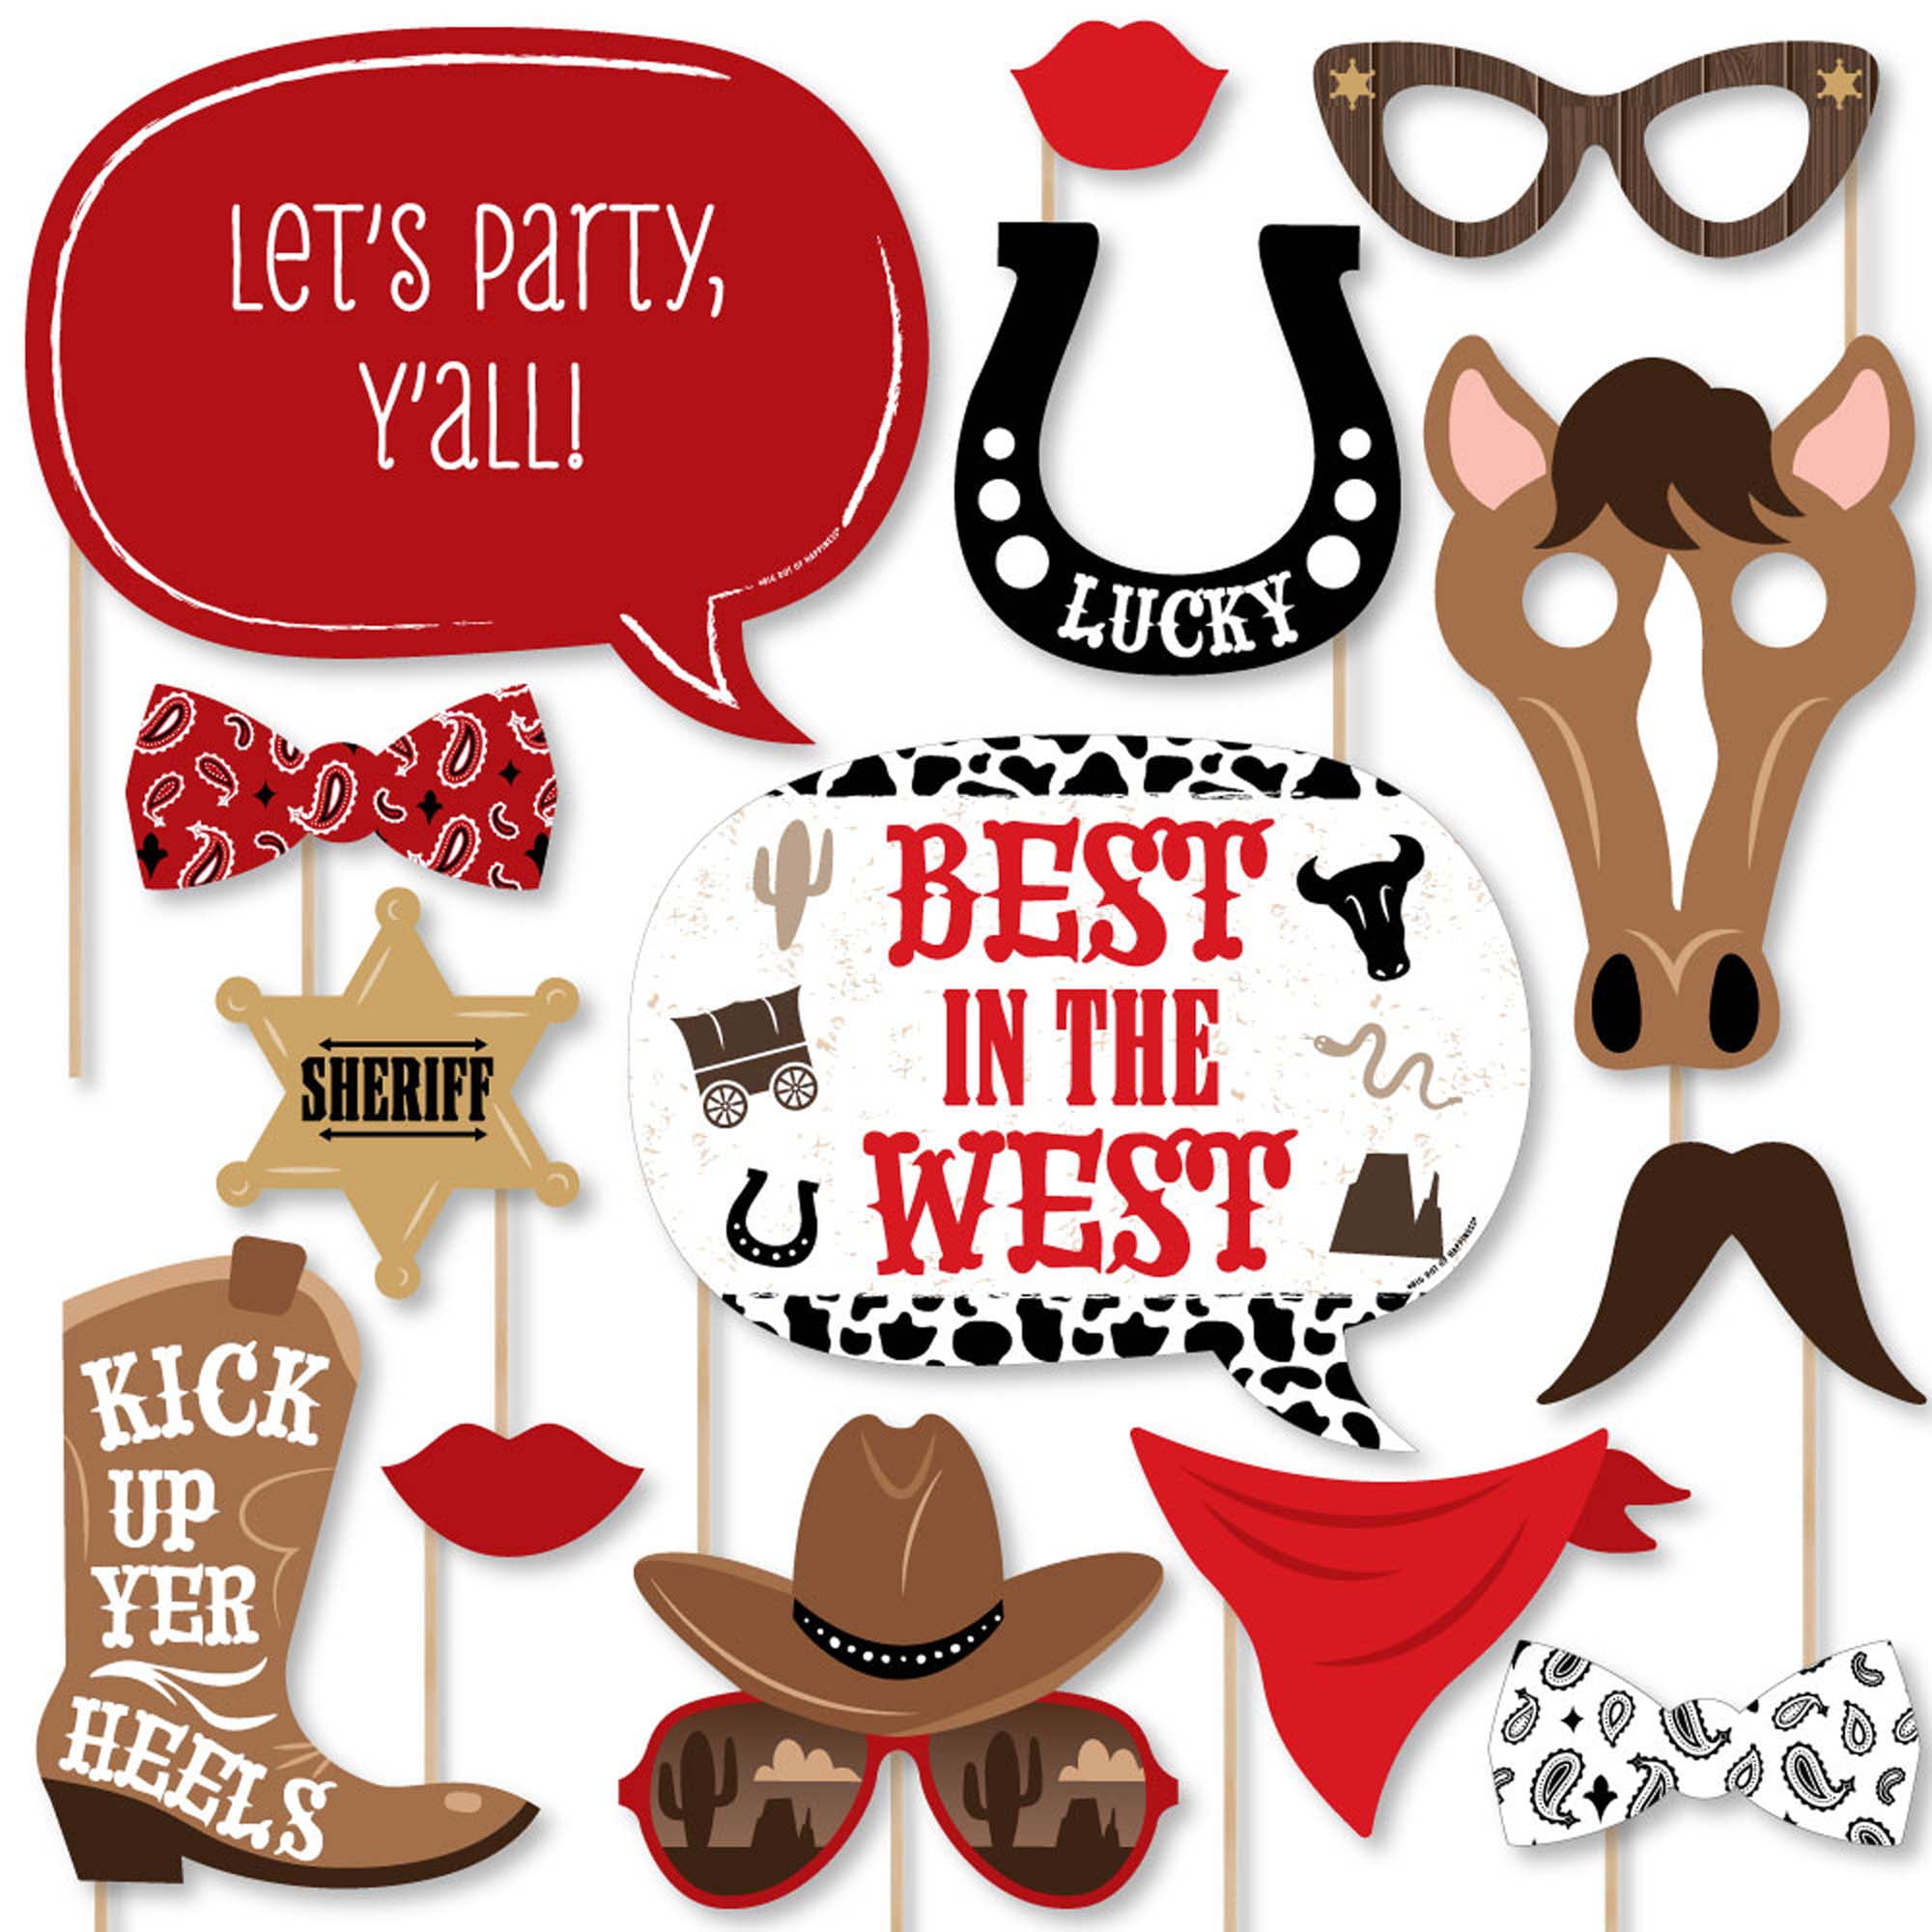 Big Dot of Happiness Western Hoedown Wild West Cowboy Party Photo Booth Props Kit 20 Count 706ffa39 02d2 4977 9780 500e5b683990.77e78601e5f7ddef3cb74868367dc3e9